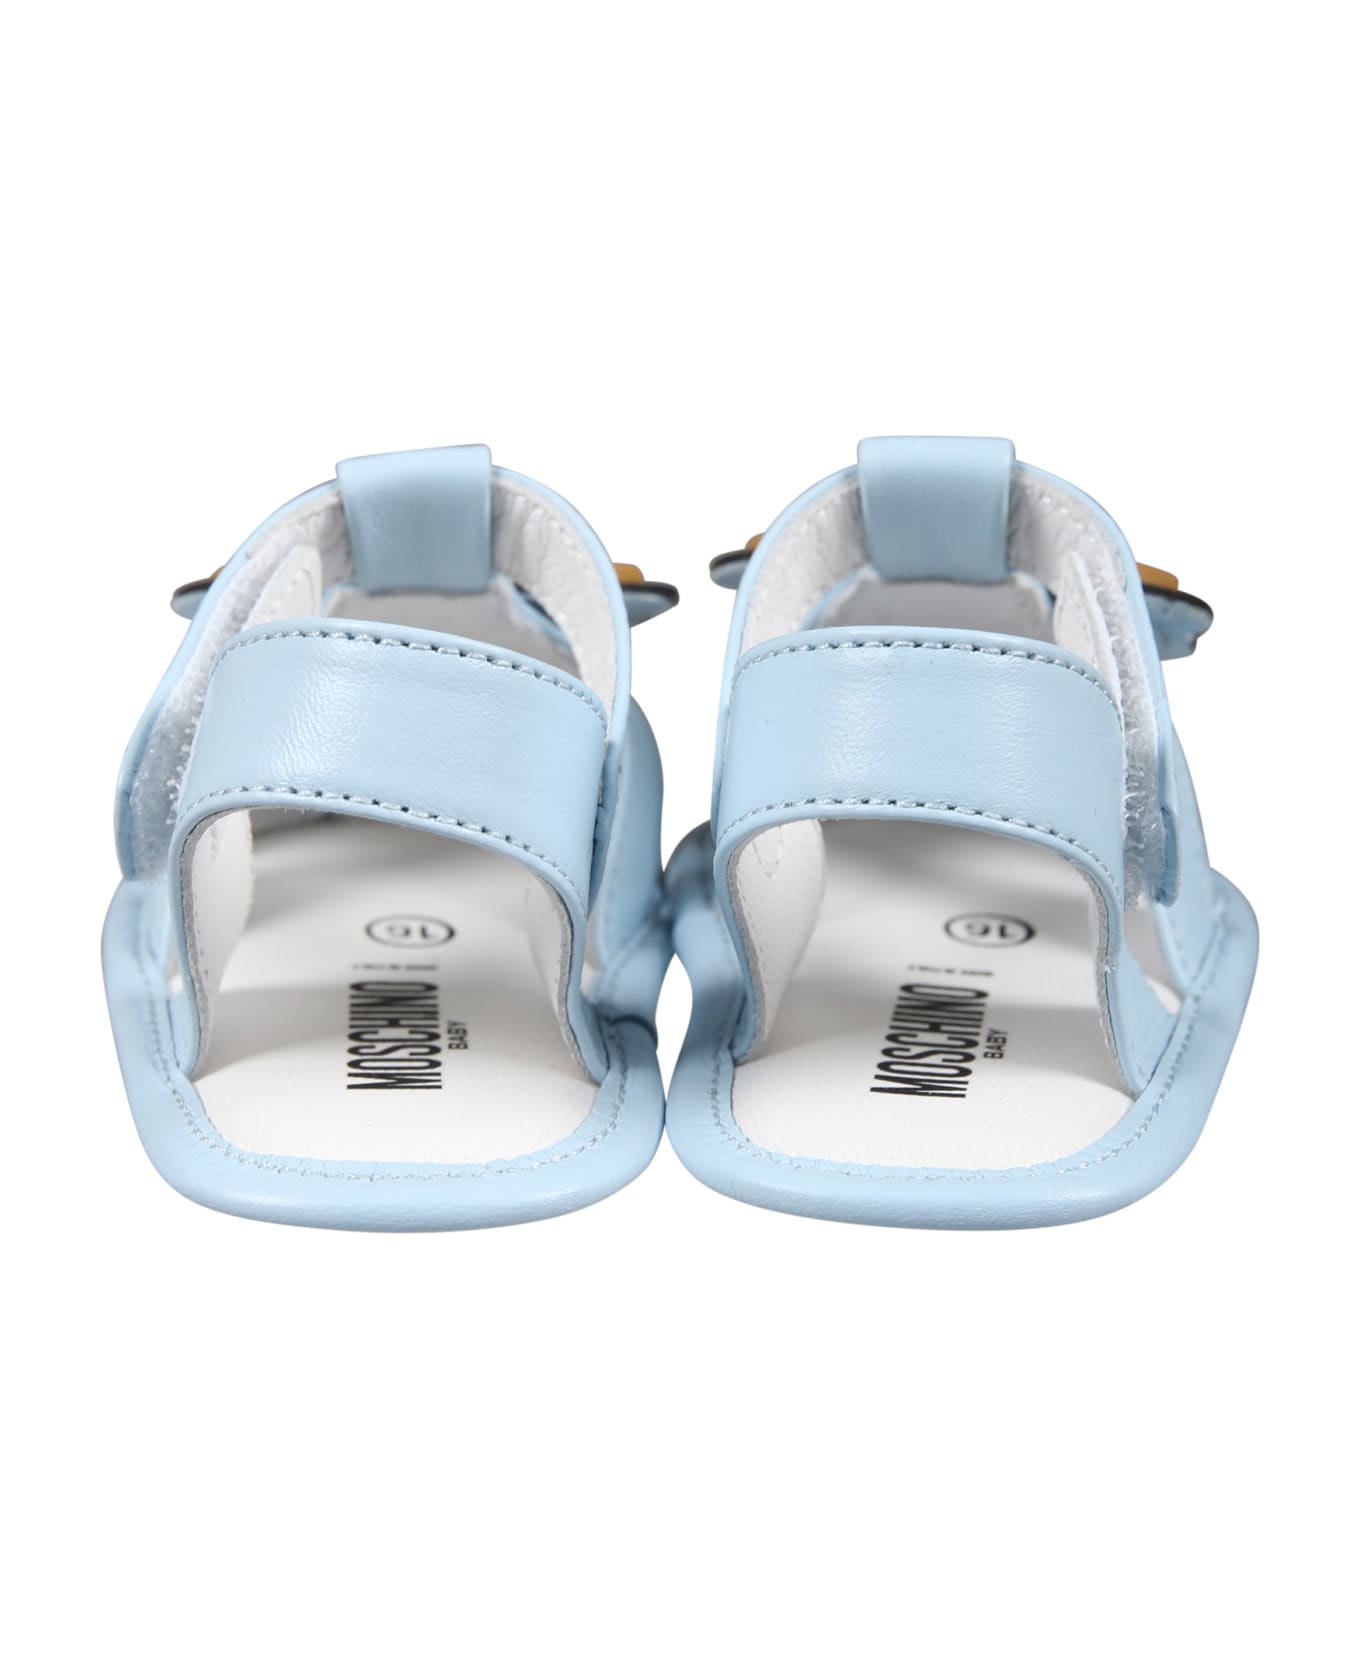 Moschino Light Blue Sandals For Baby Boy With Teddy Bear - Light Blue